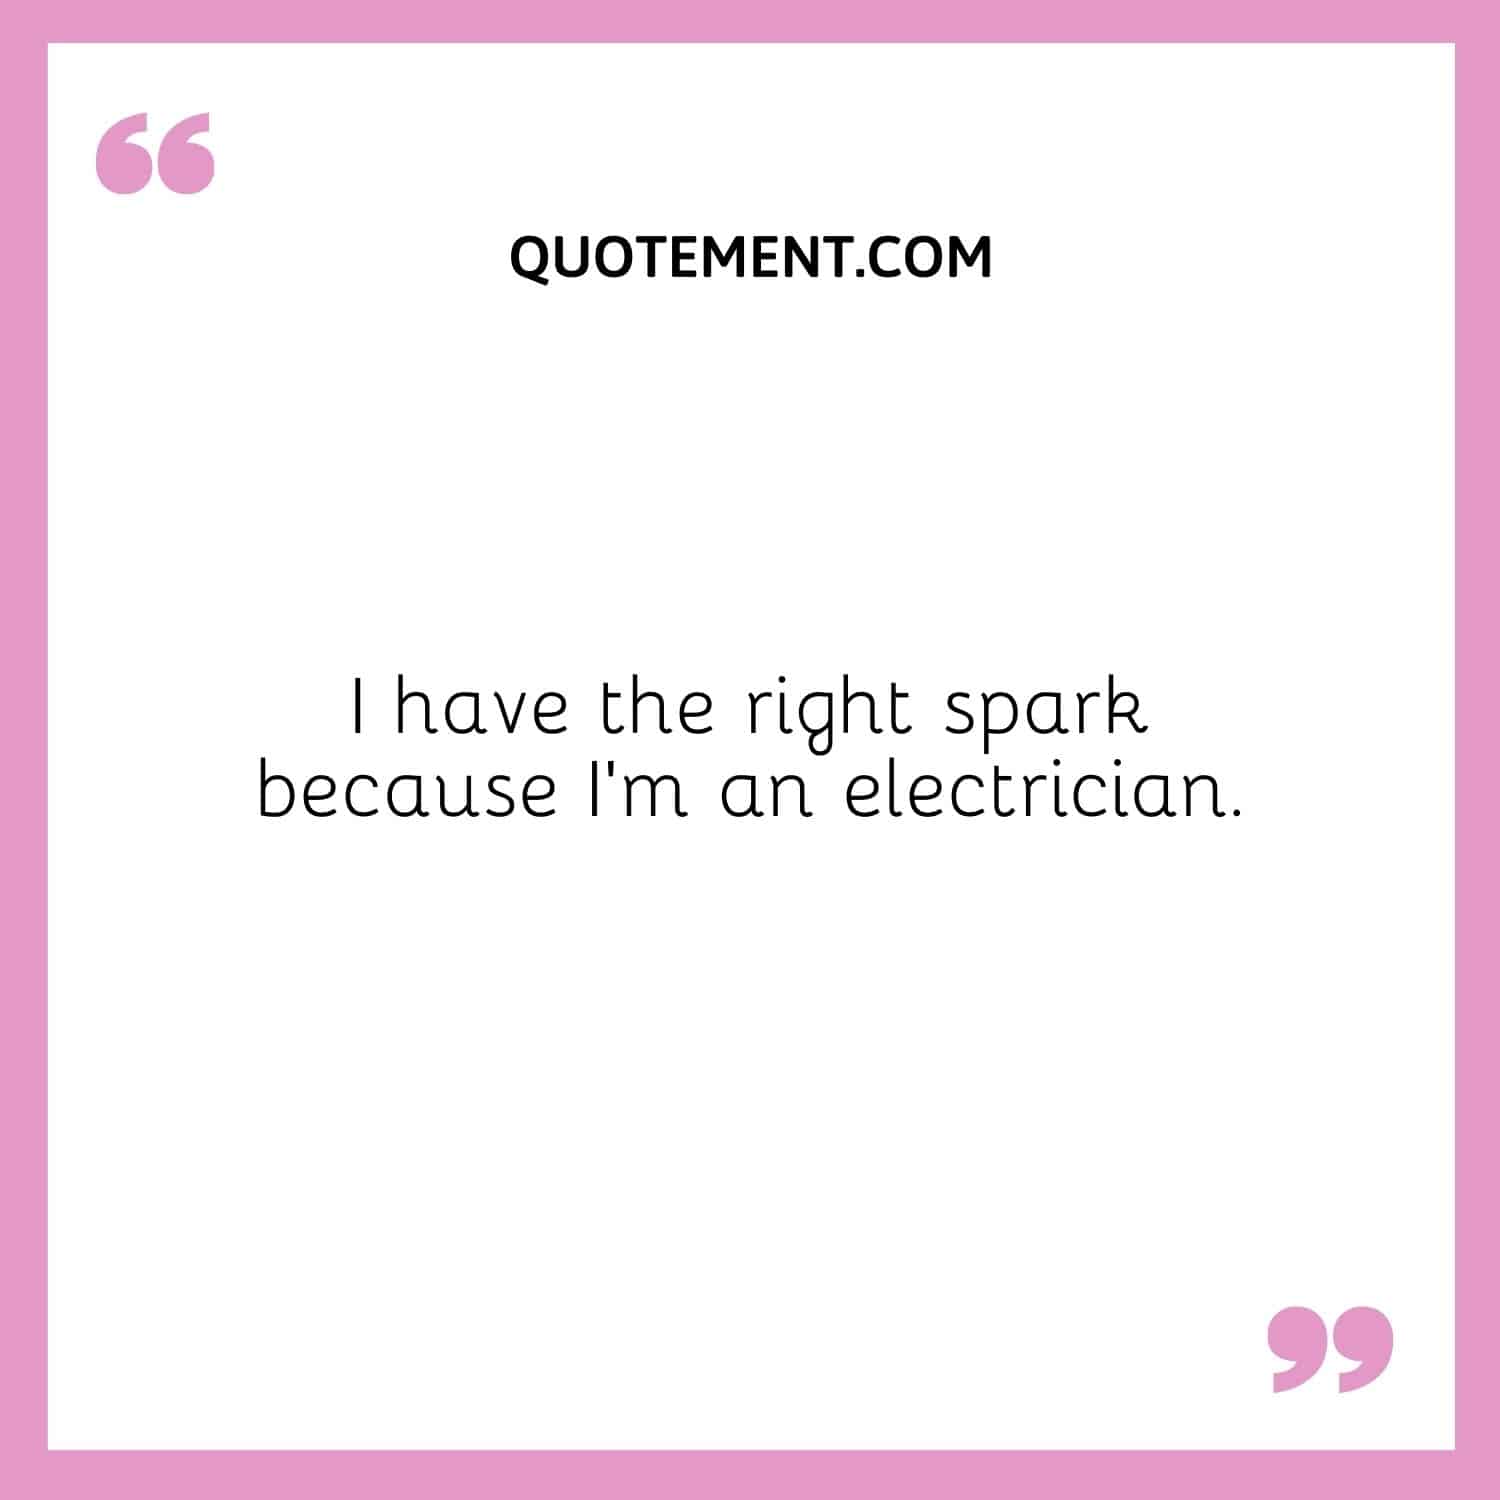 I have the right spark because I’m an electrician.